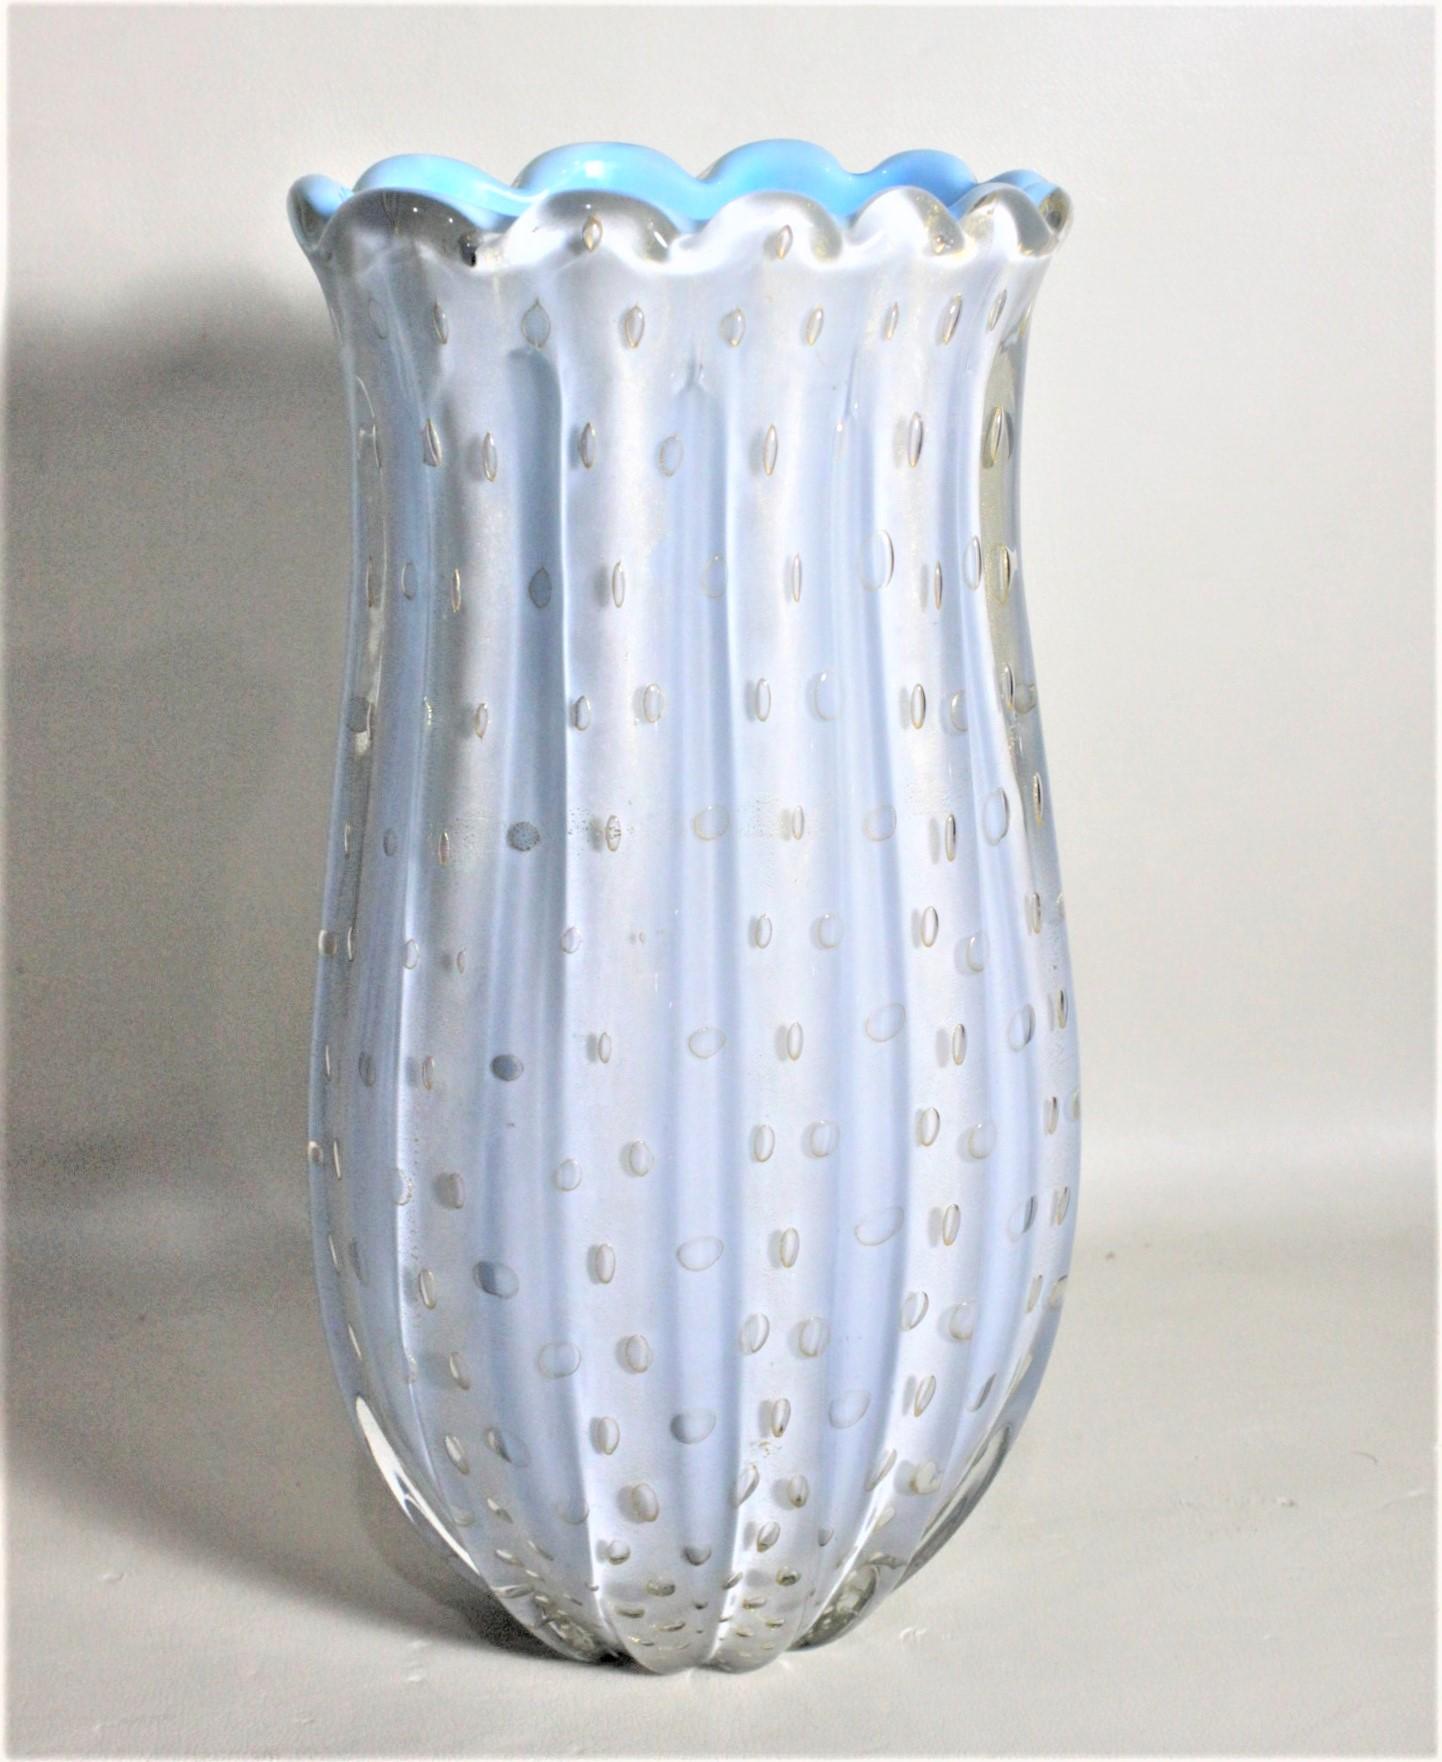 This Murano art glass vase is unsigned, but was most likely done by Angelo Barovier of Italy in circa 1969 in the period Mid-Century Modern style. The vase is a cased white over turquoise glass with ripples around the rim and a cascading controlled